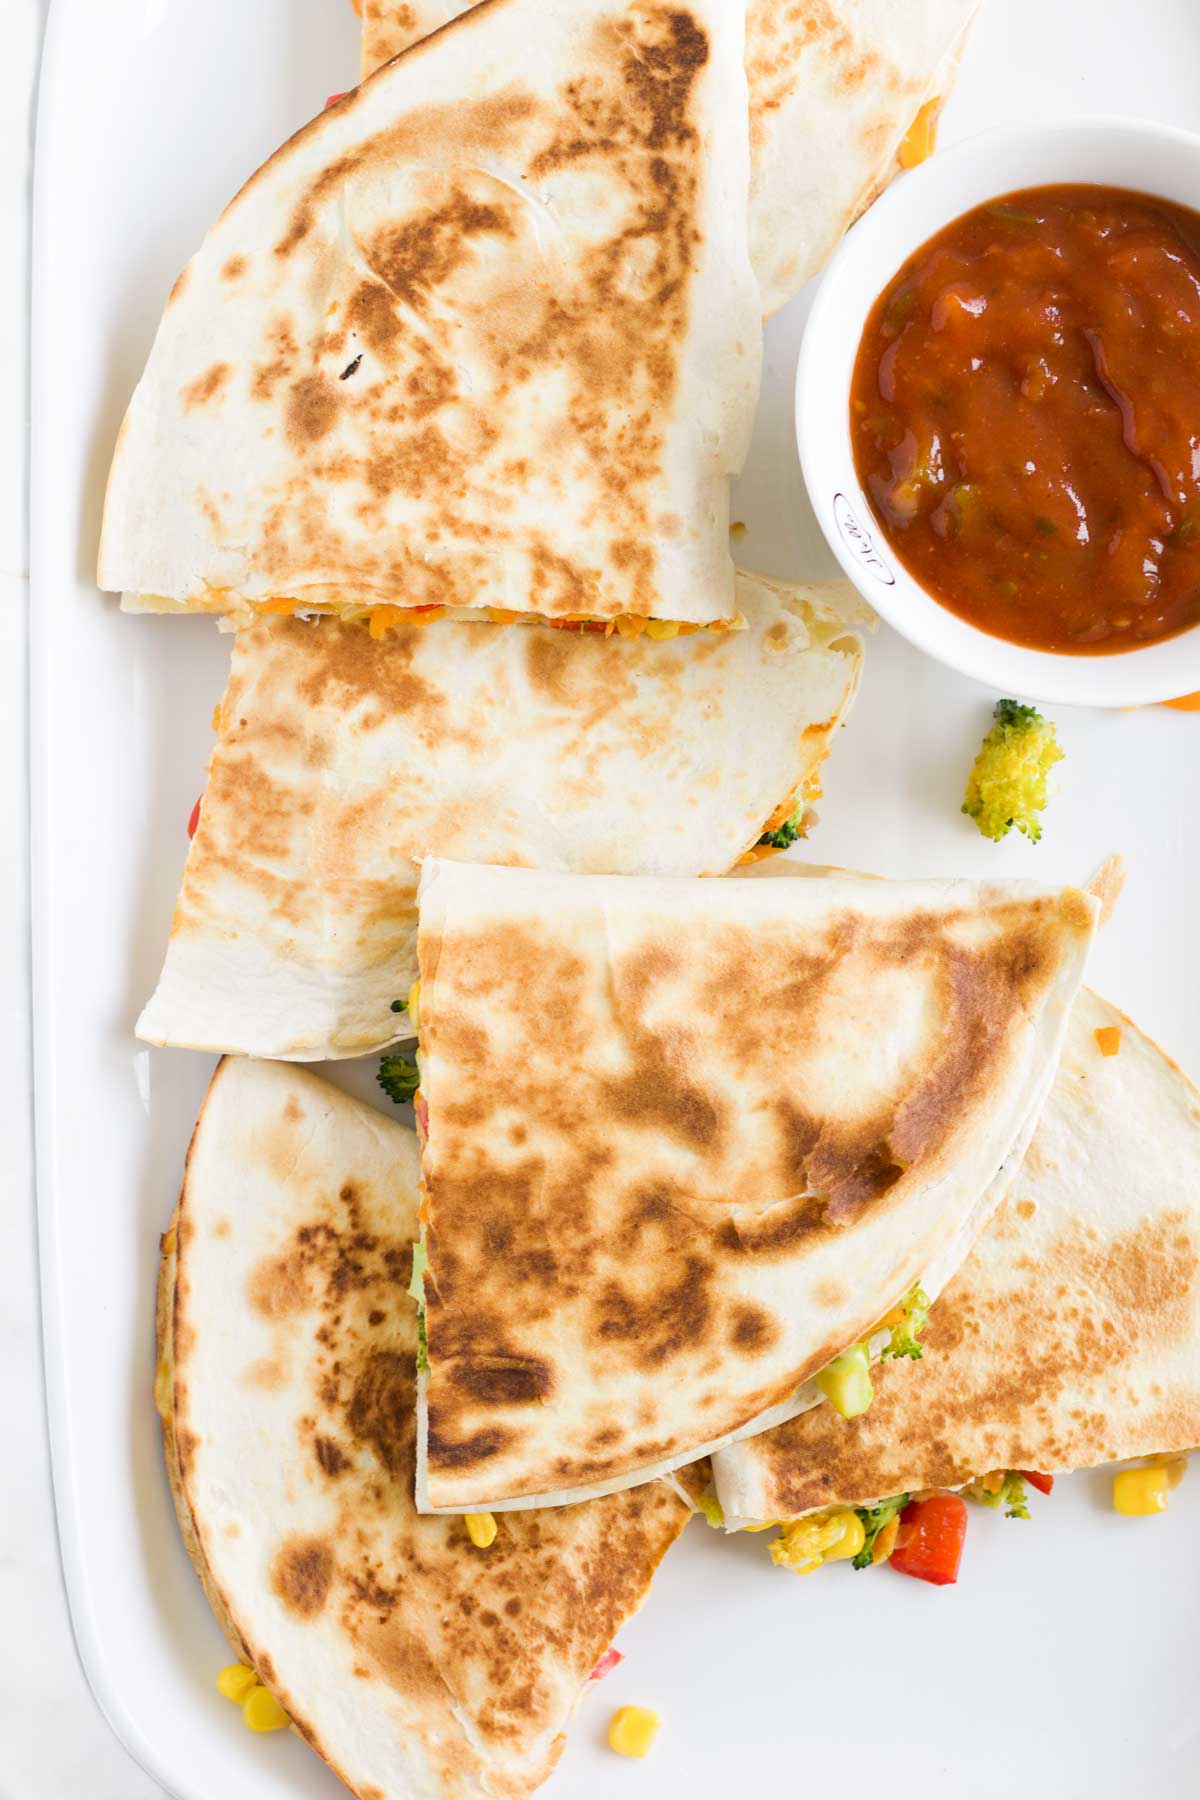 Vegetable Quesadillas on Plate with Salsa Dip